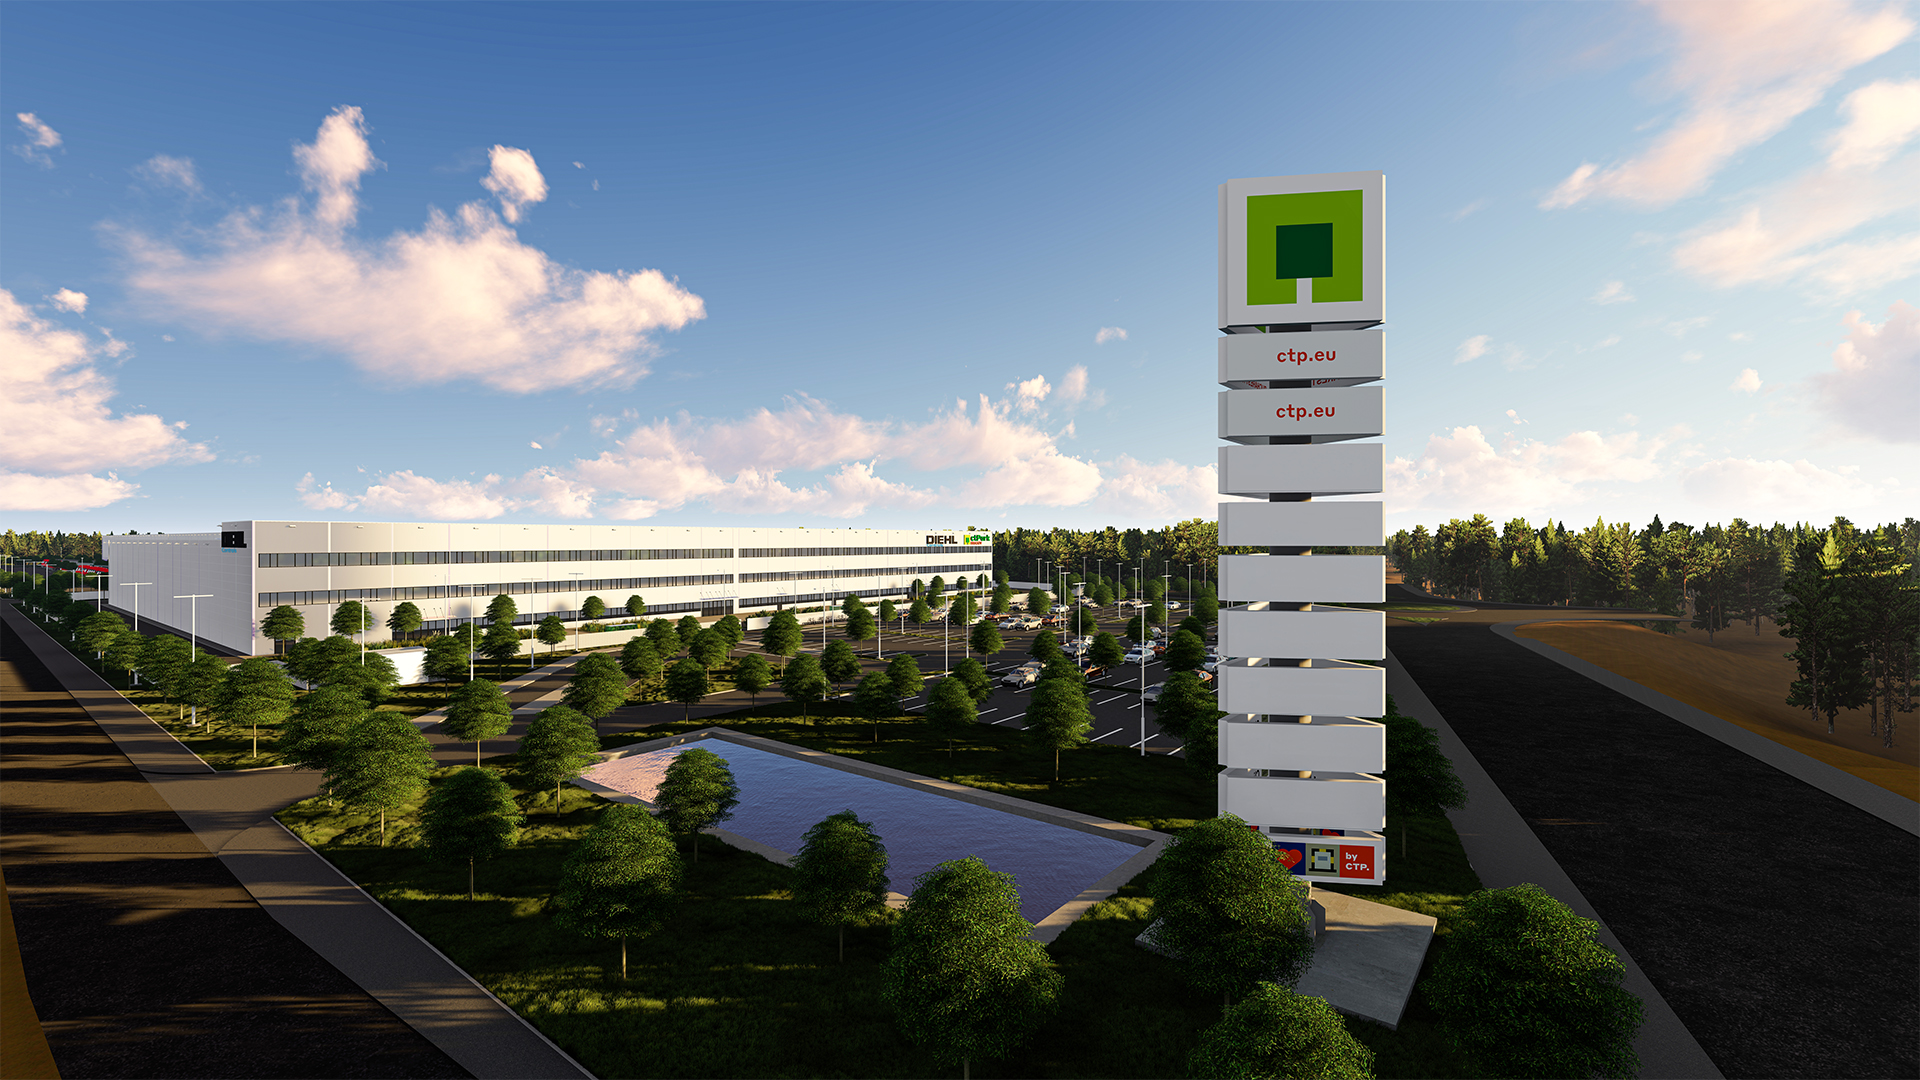 We are expanding the headquarters in Pitesti